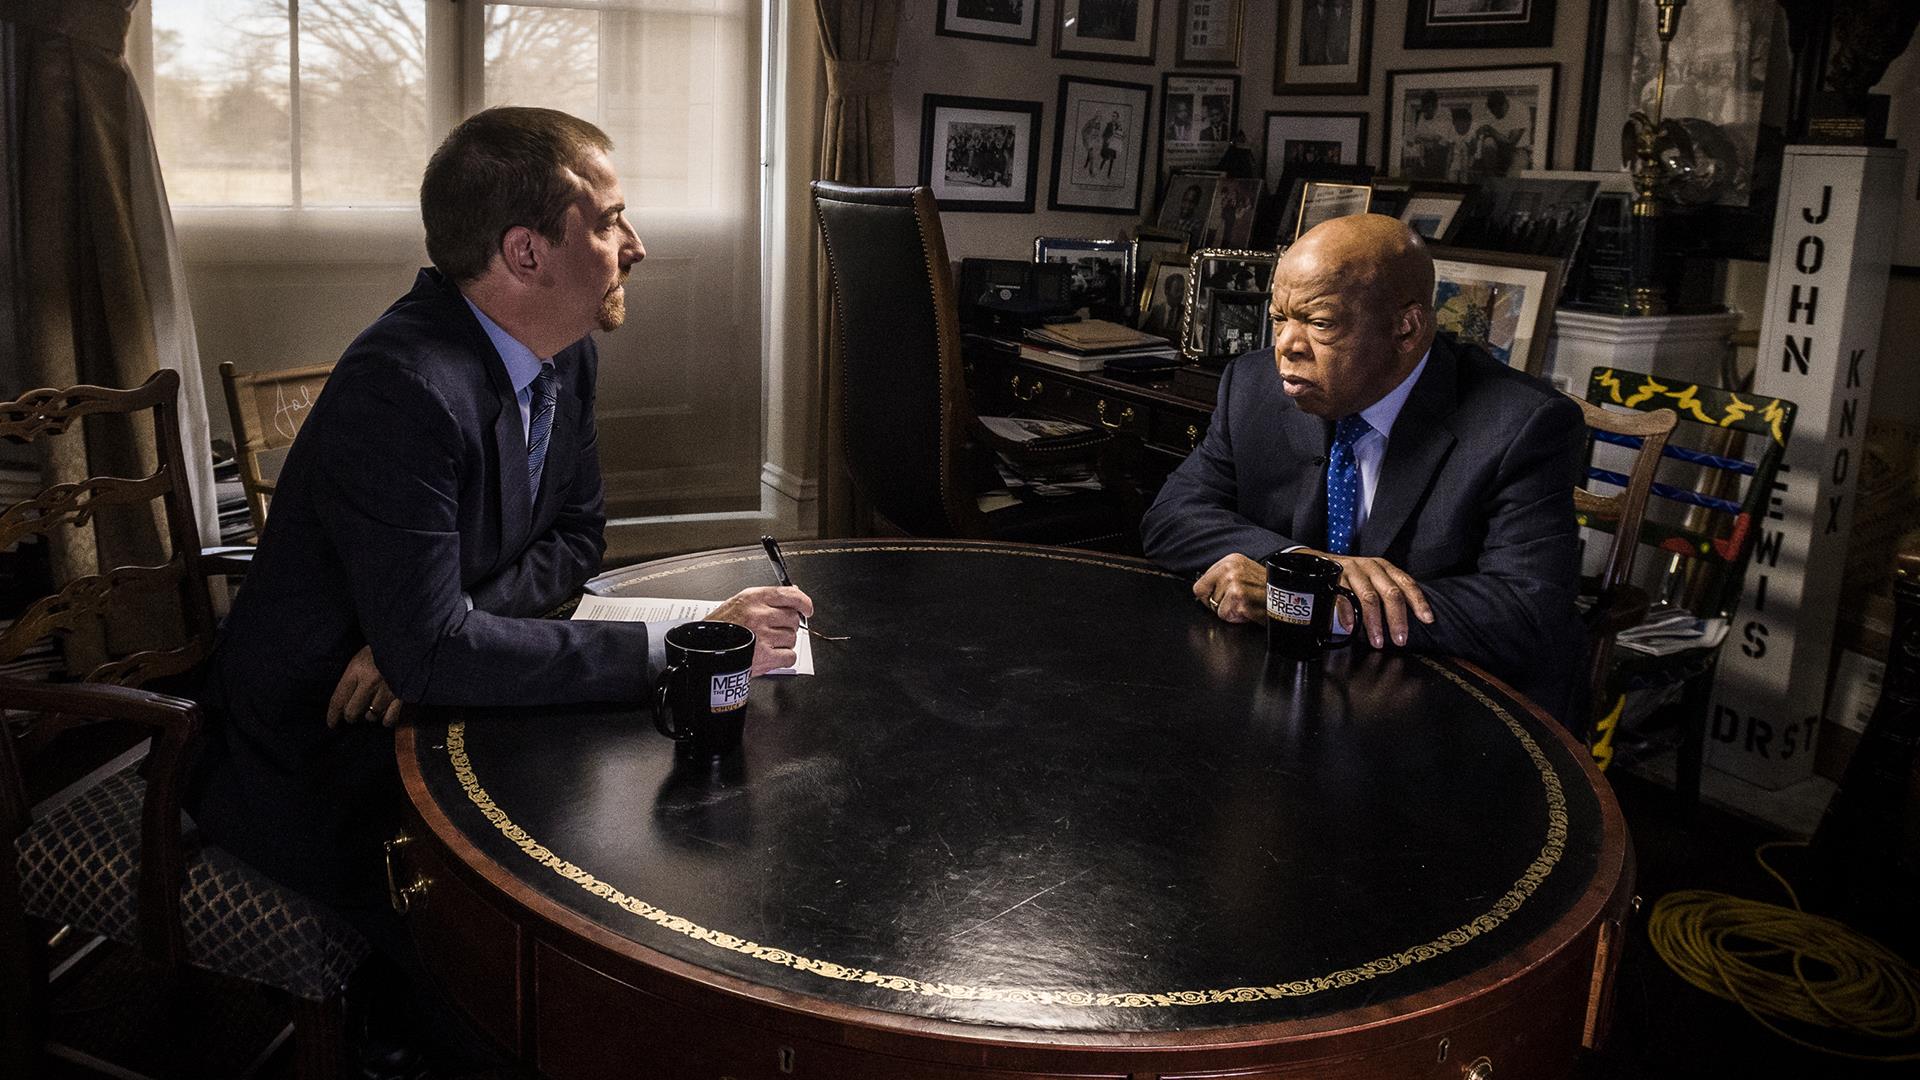 Full John Lewis Interview: 'We Must Not Be Silent'